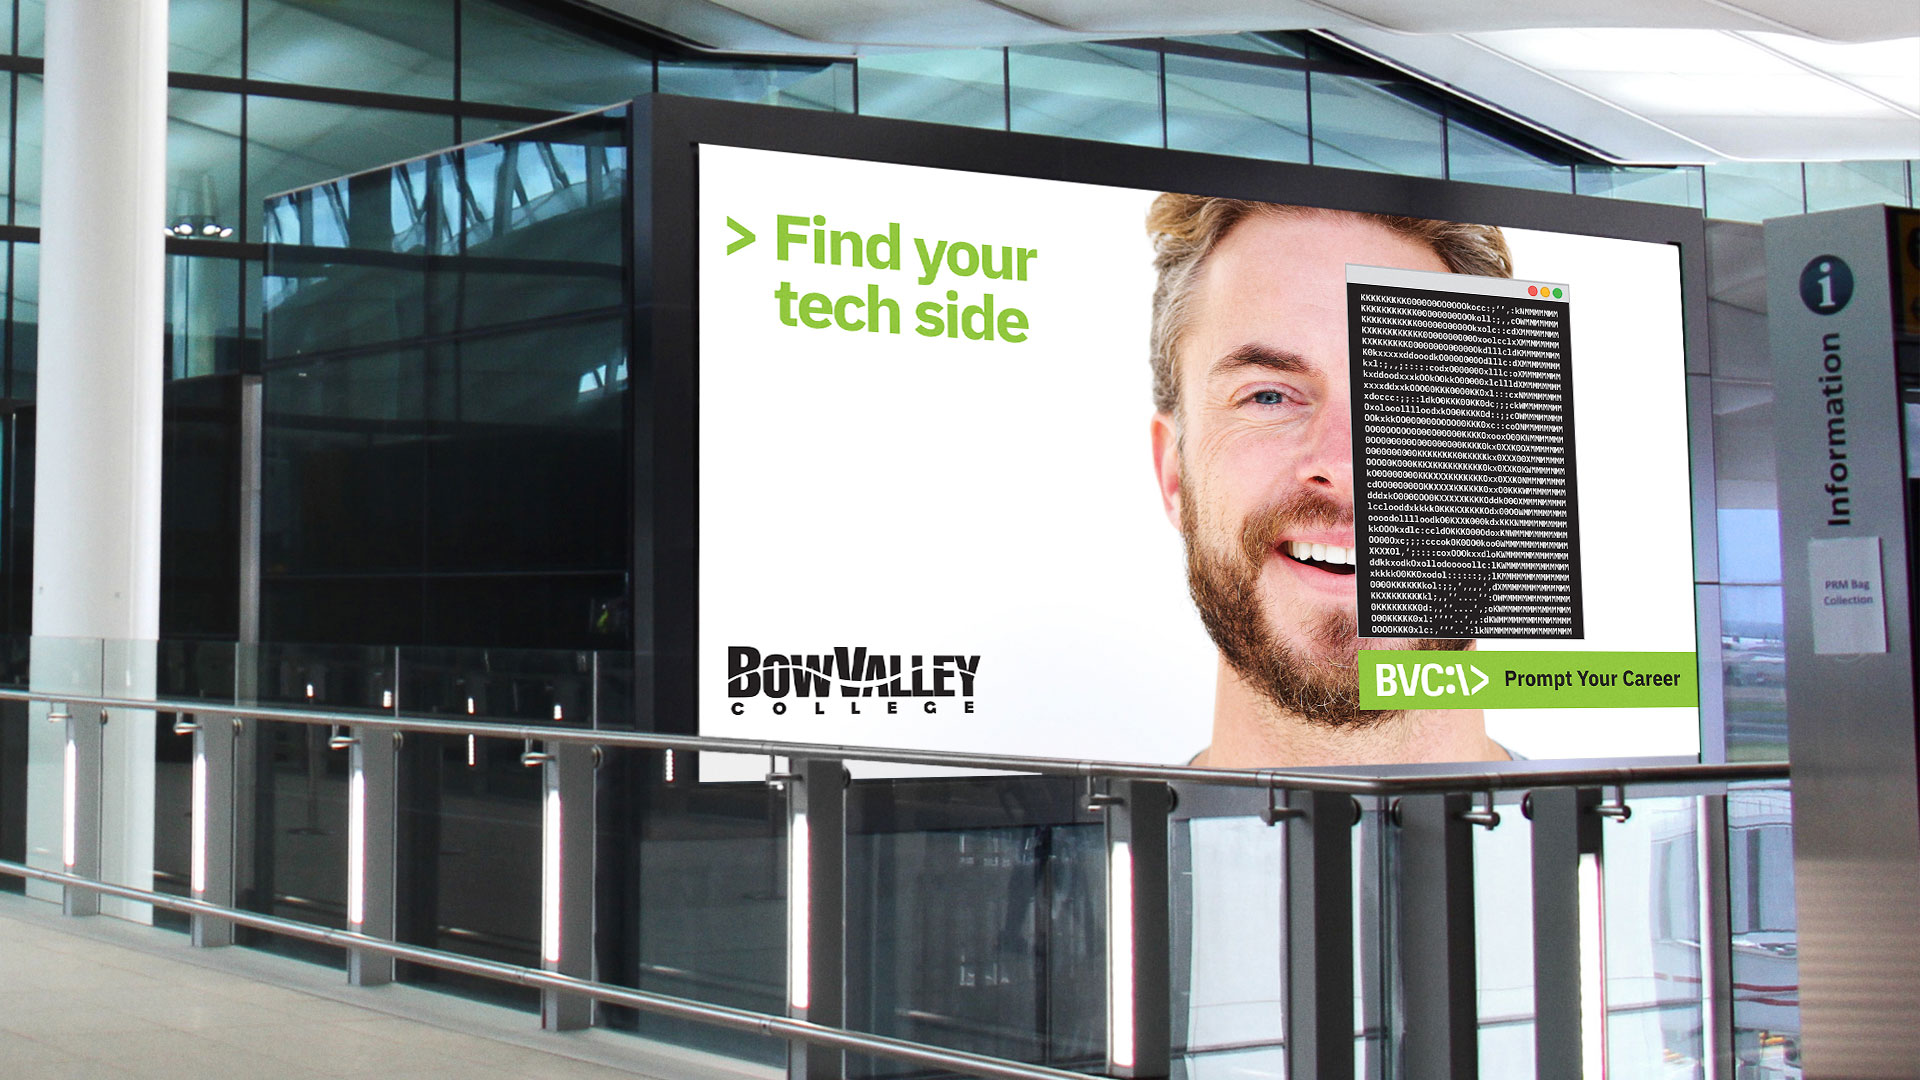 Featured image for “Bow Valley College”